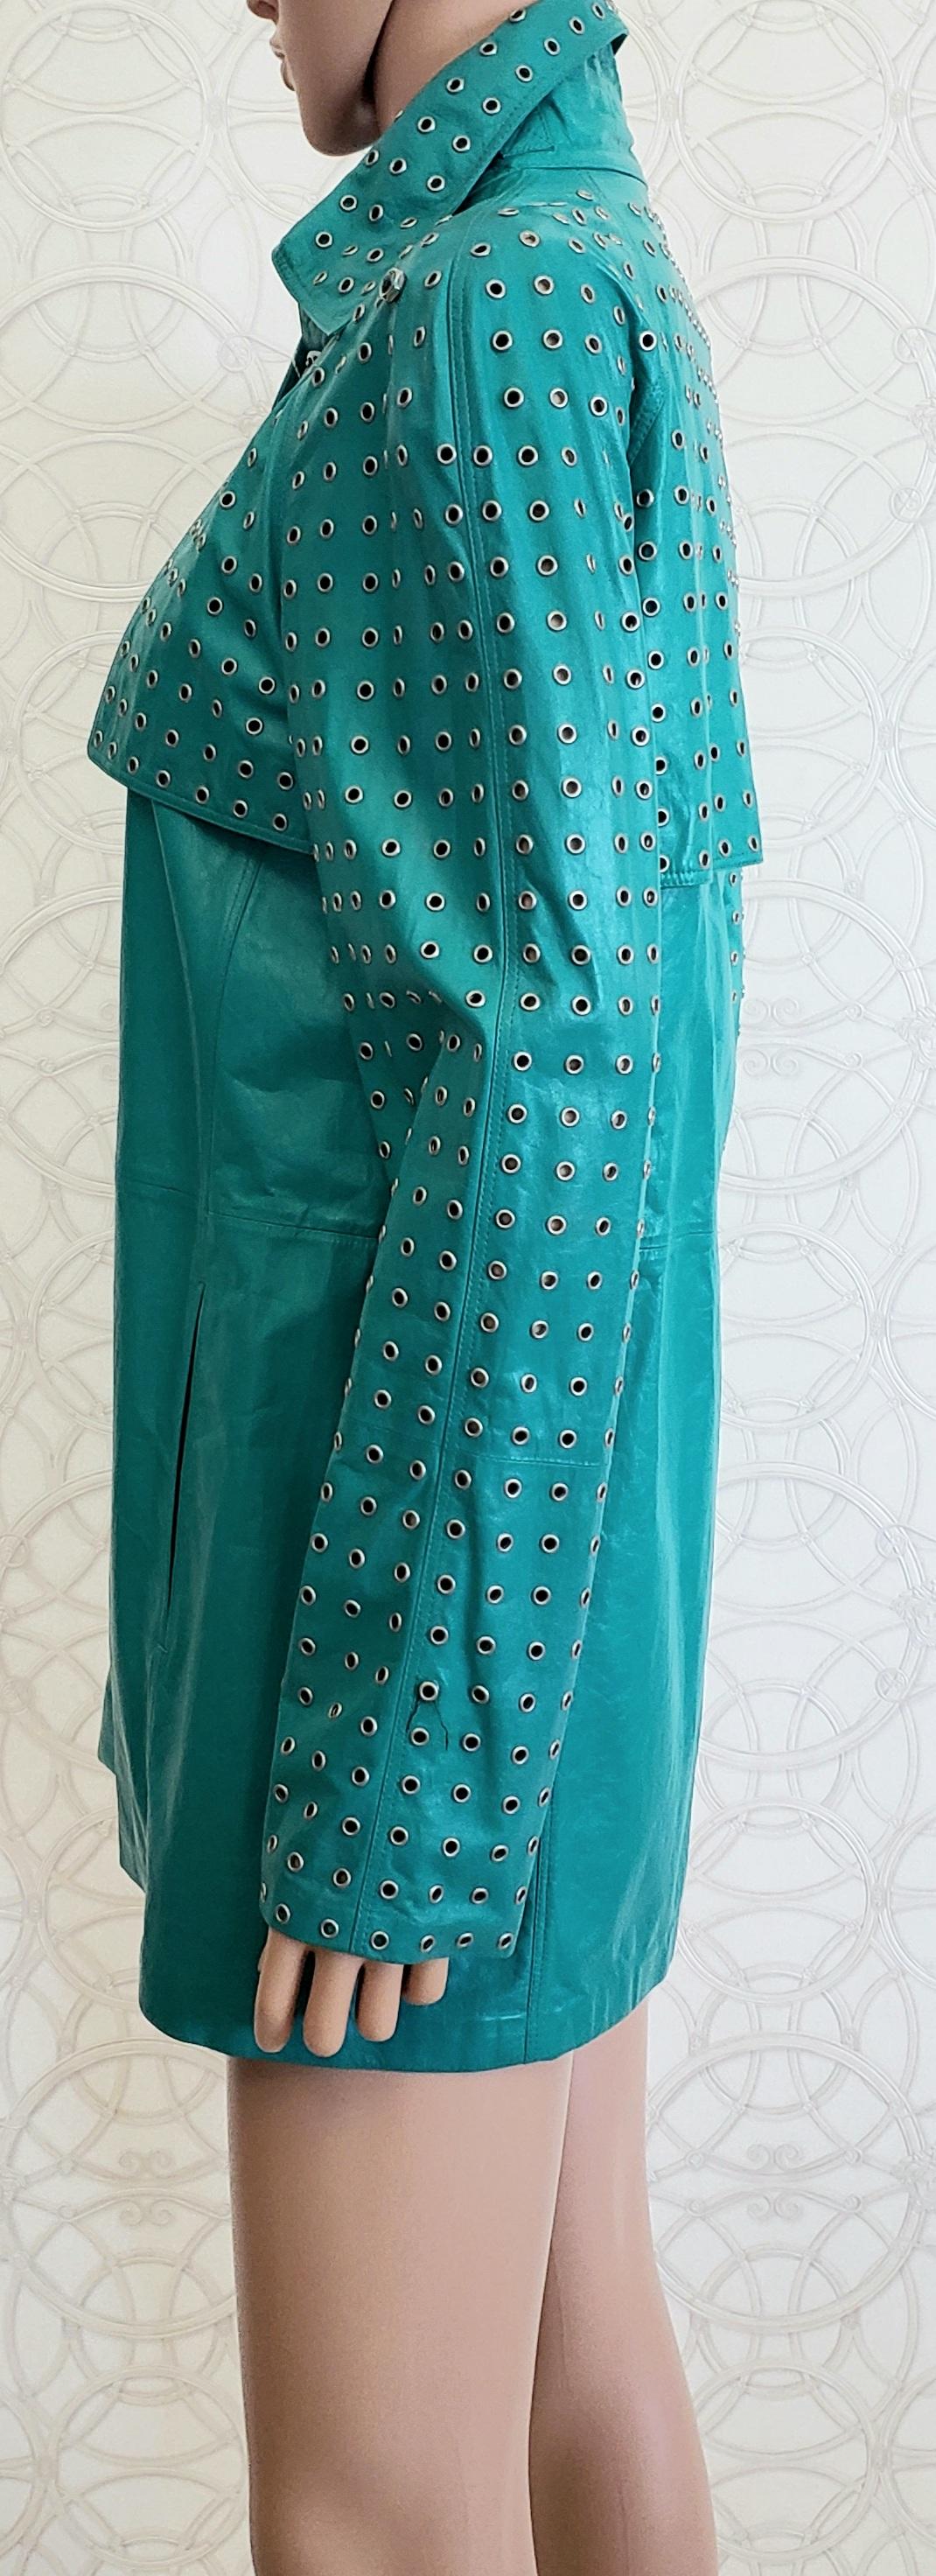 Men's NEW GIANNI VERSACE EMERALD GREEN LEATHER JACKET with RIVETS Sz IT 40 - US 4/6 For Sale